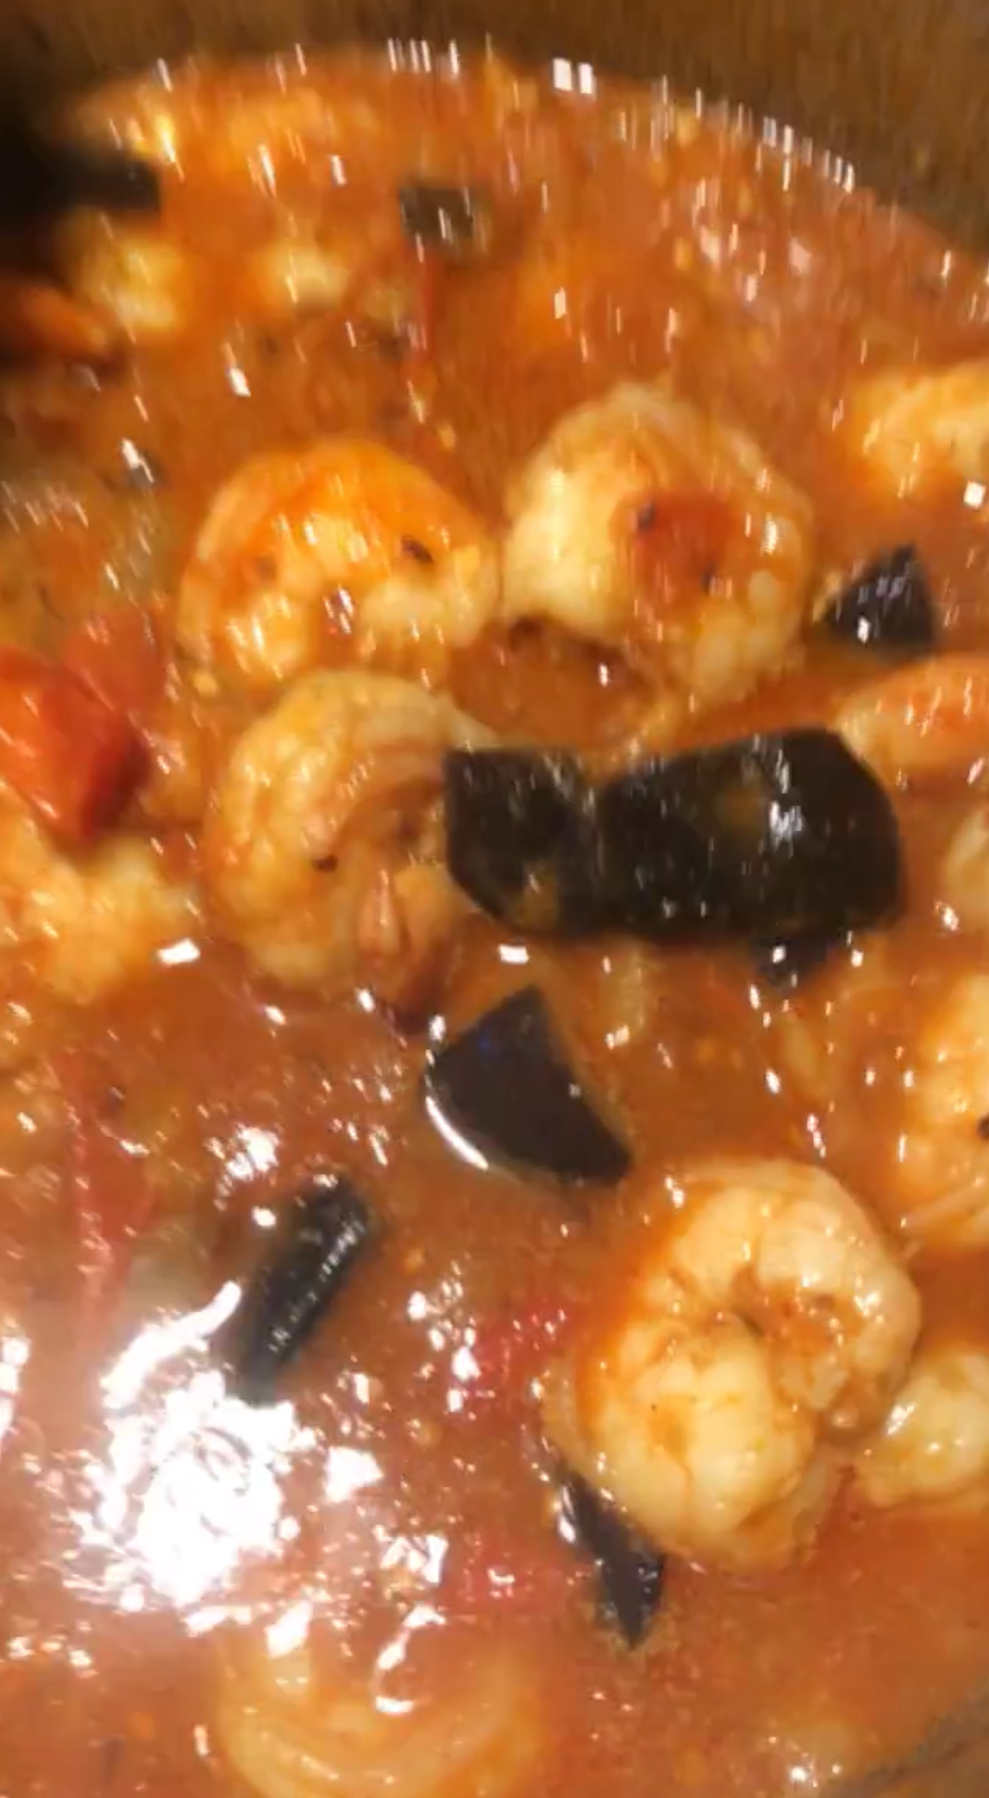 Shrimp and Eggplant curry - The Curry Theory